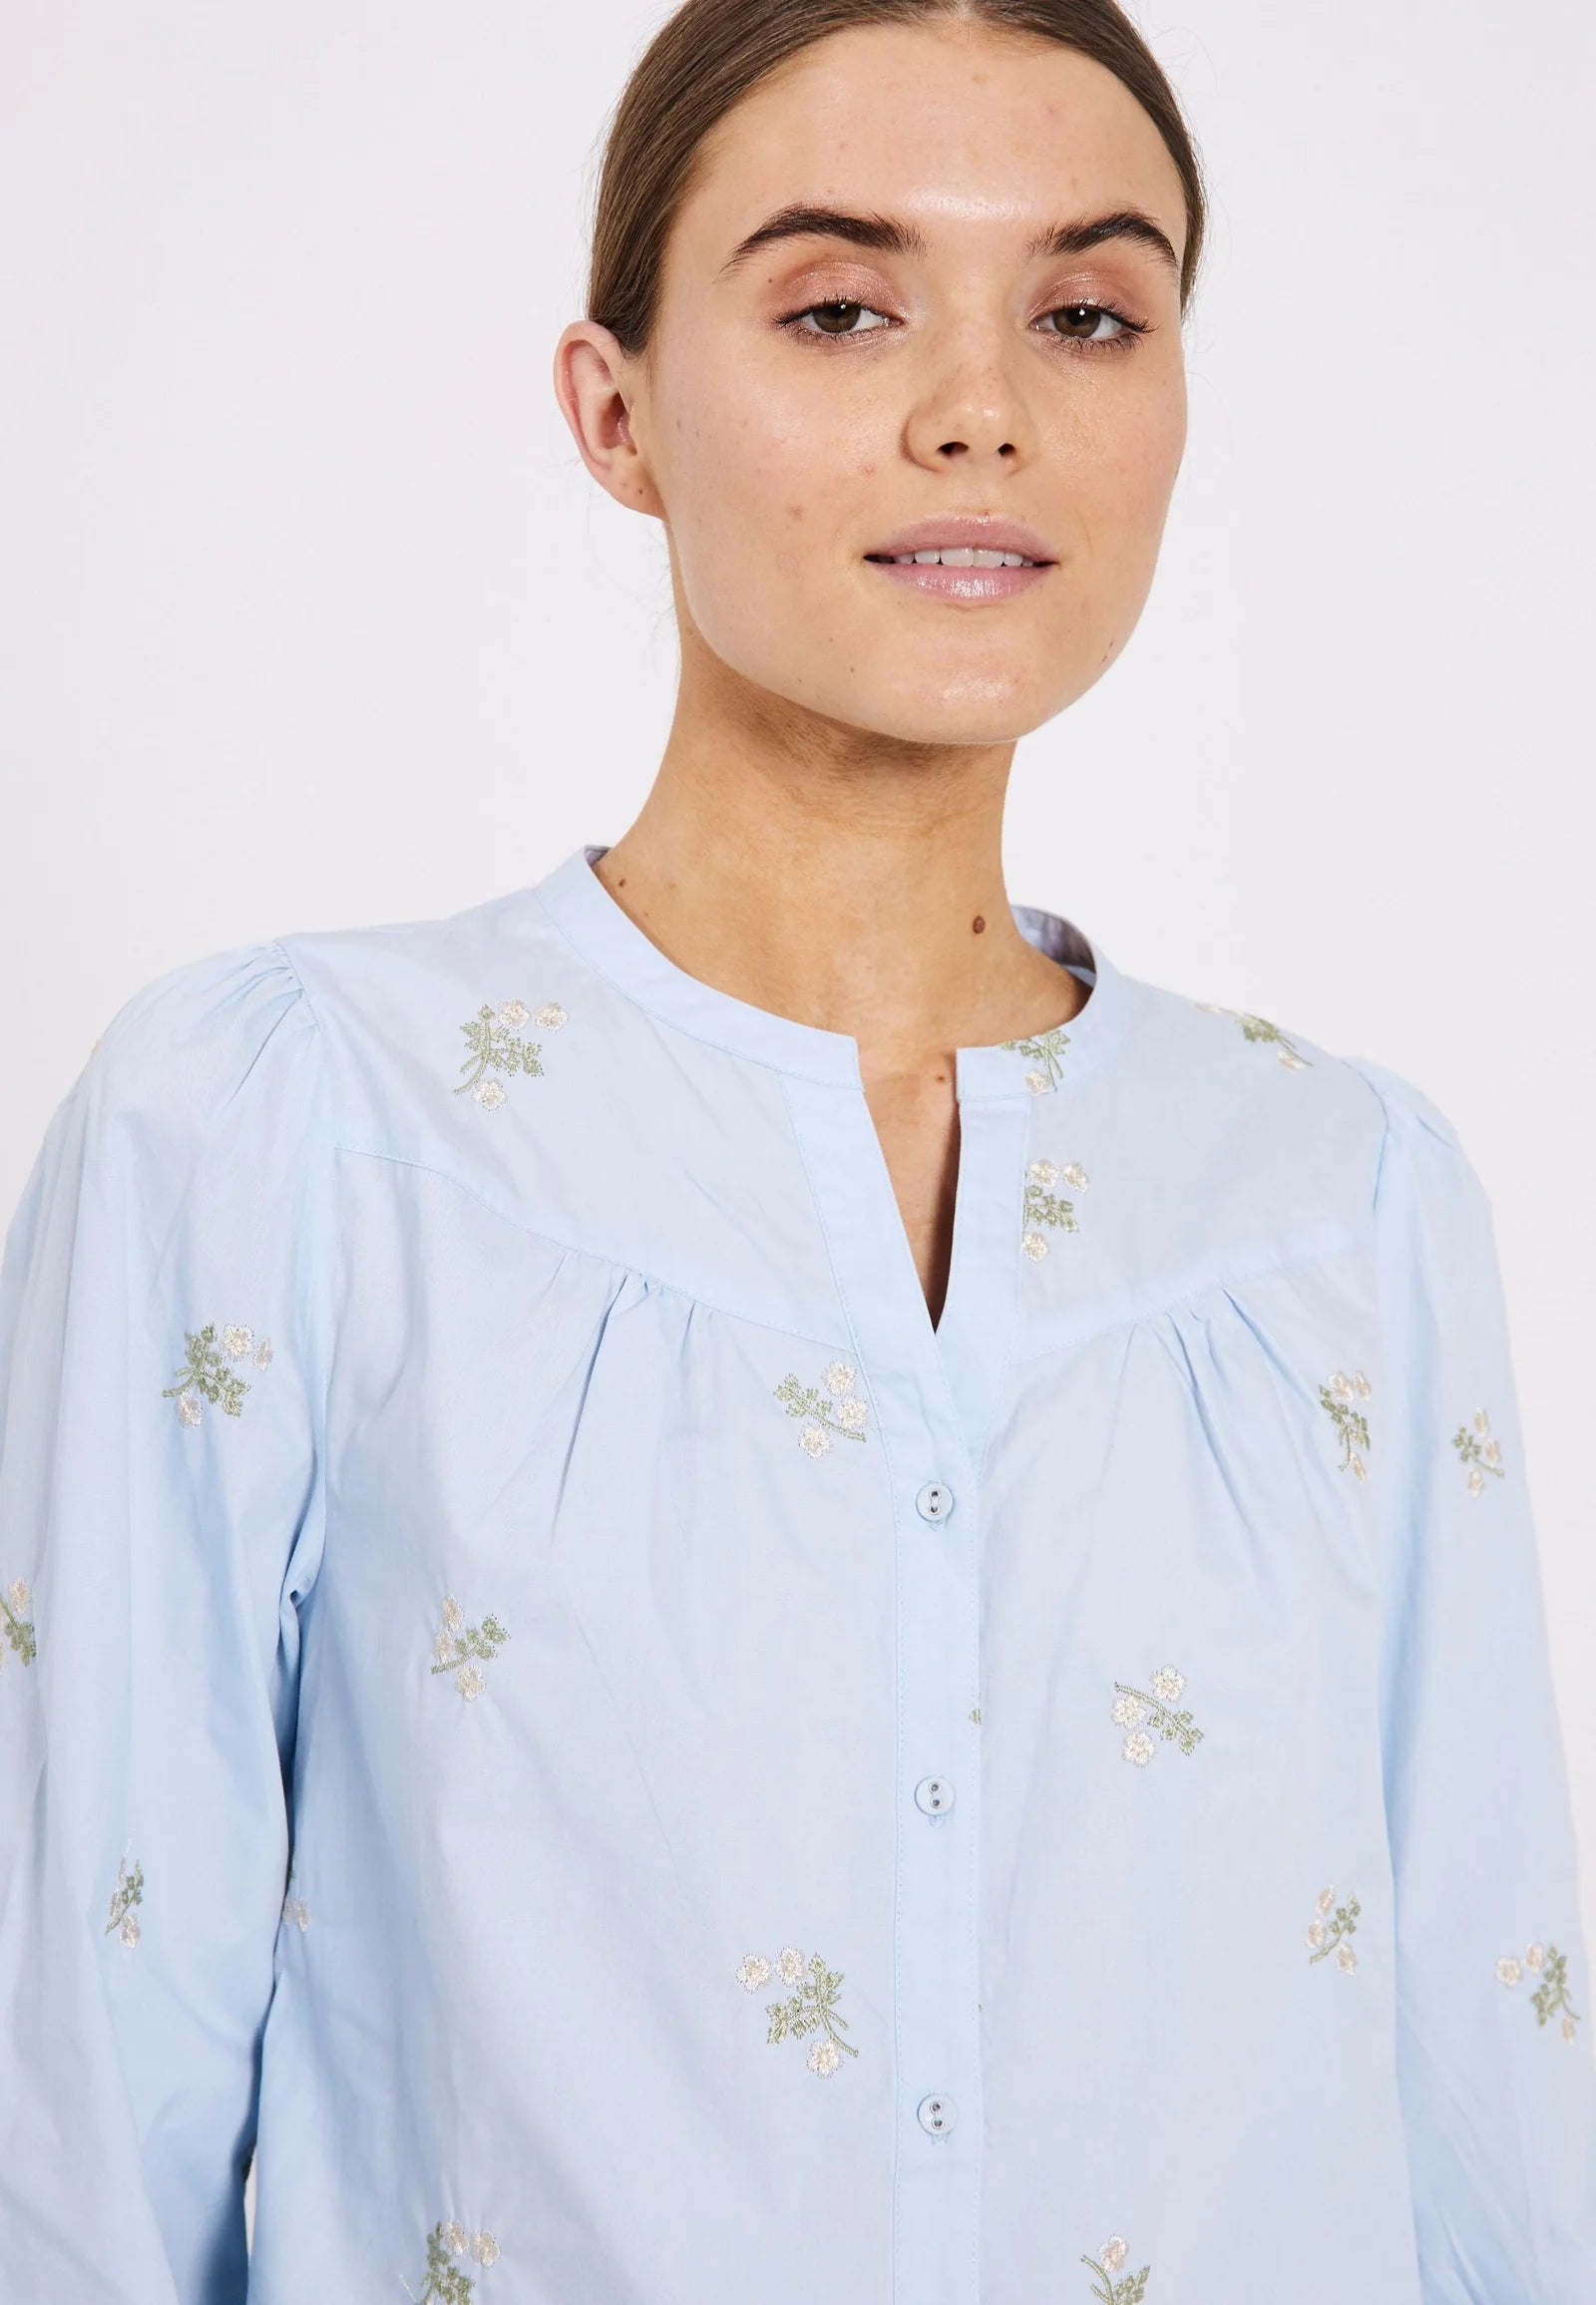 NORR Miluna Embroidery Shirt Light Blue W. Embroidery - hvittrad.no